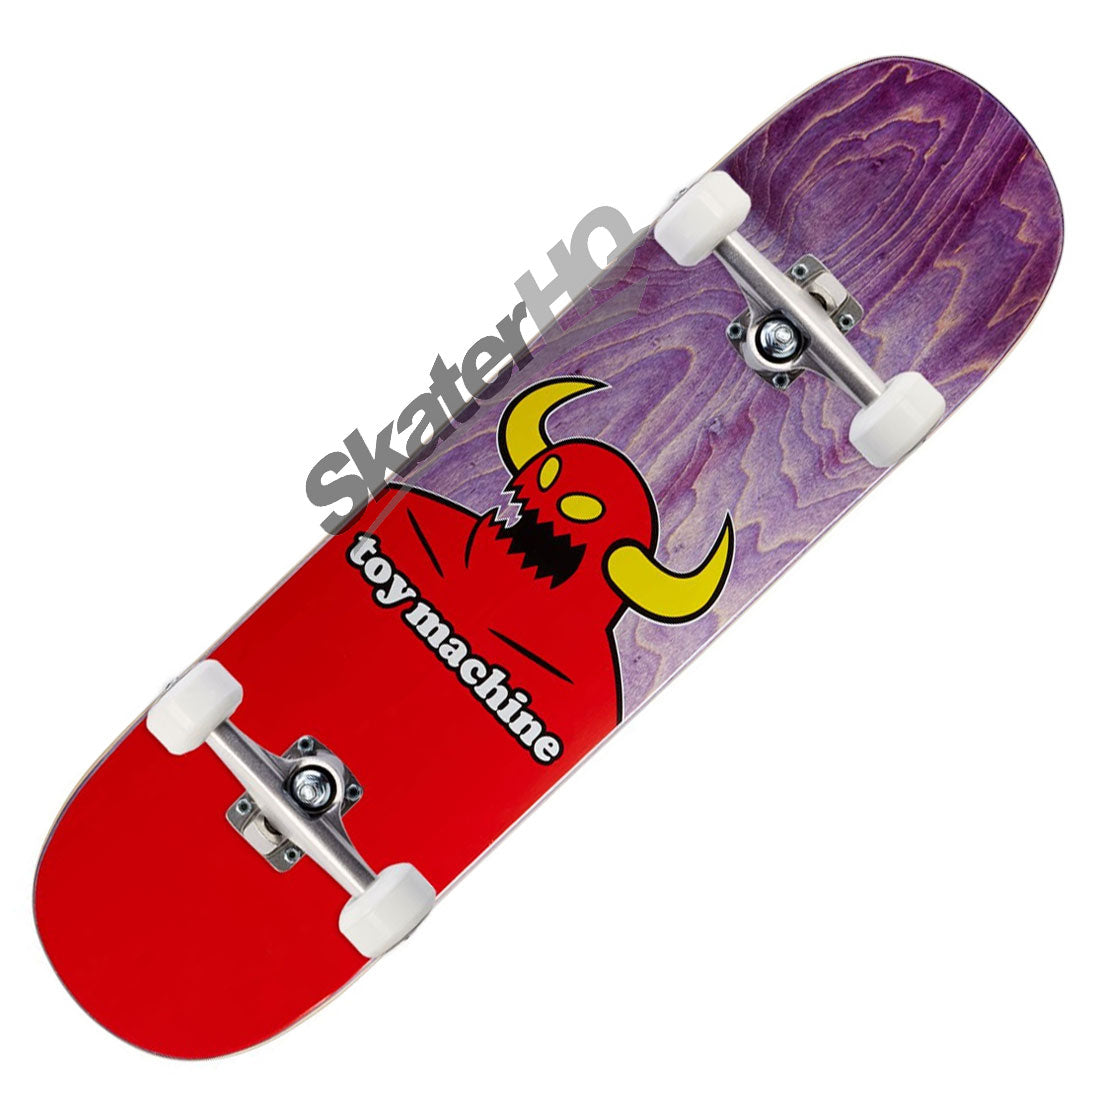 Toy Machine Monster 8.0 Complete - Purple Stain Skateboard Completes Modern Street